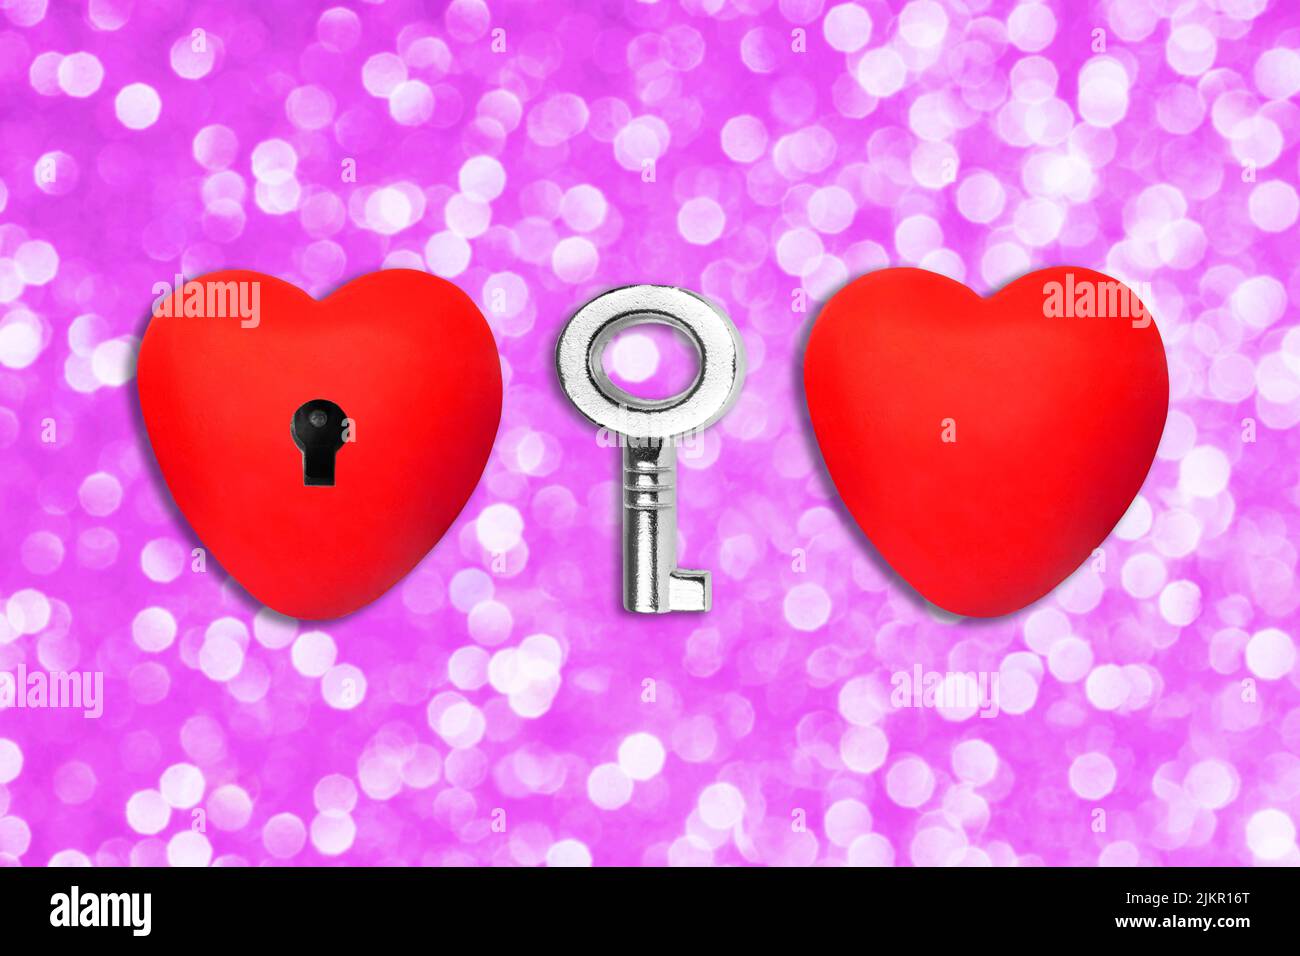 Two red heart shapes and a skeleton key on dreamy pink background with bokeh effect. One heart has a keyhole. Stock Photo